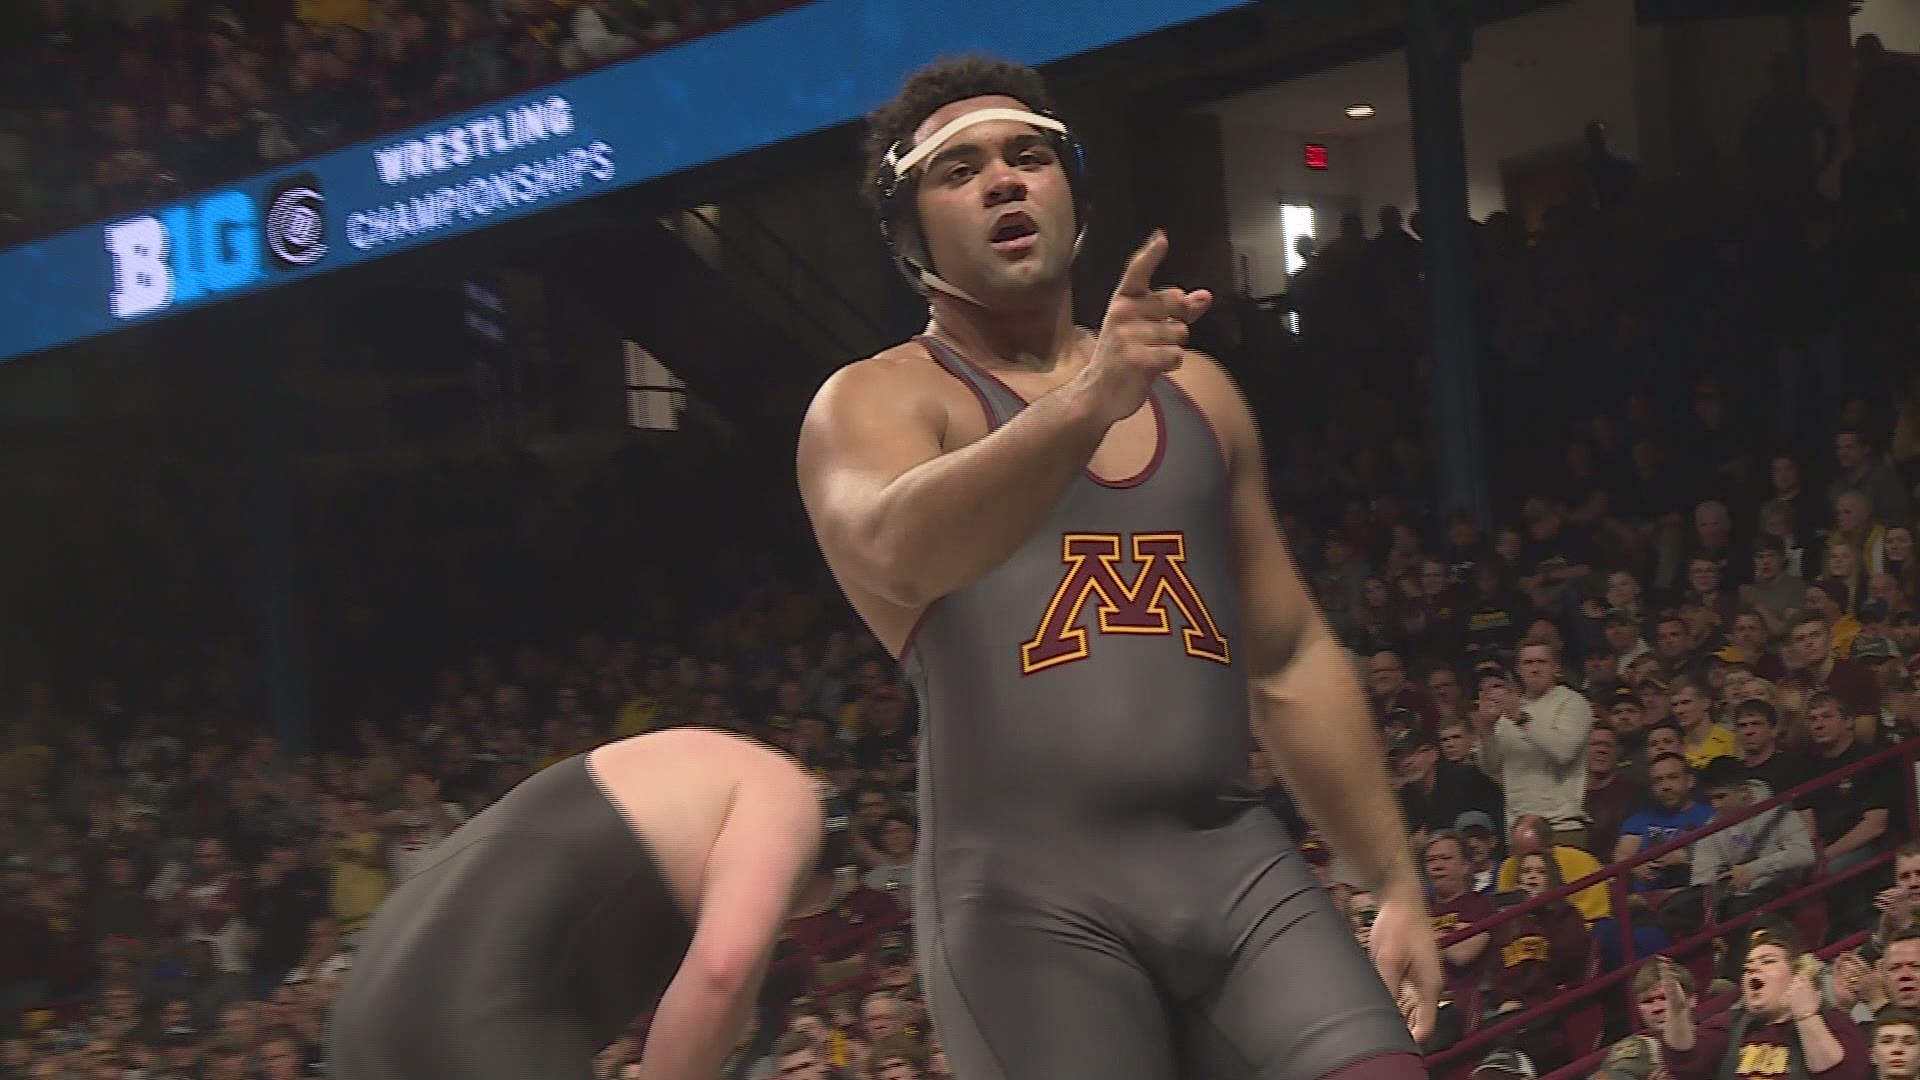 The Gopher junior is off to a 4-0 start and has hopes of wrestling for Team USA at the Olympics this summer.